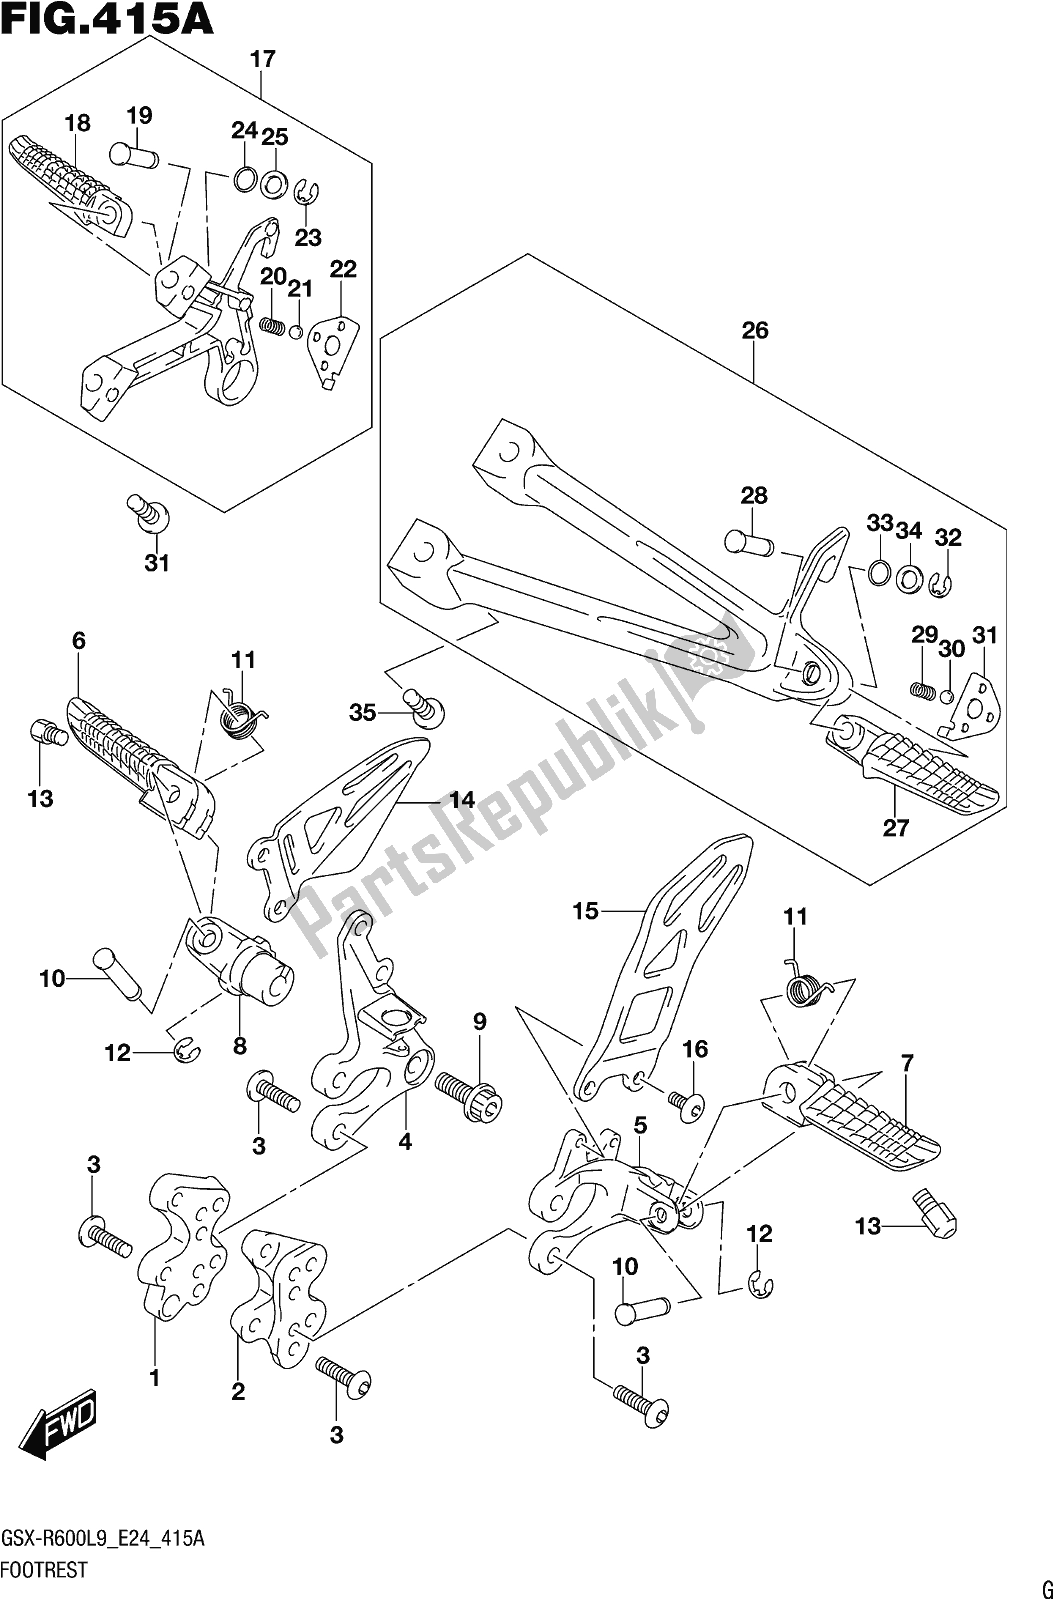 All parts for the Fig. 415a Footrest of the Suzuki Gsx-r 600 2019